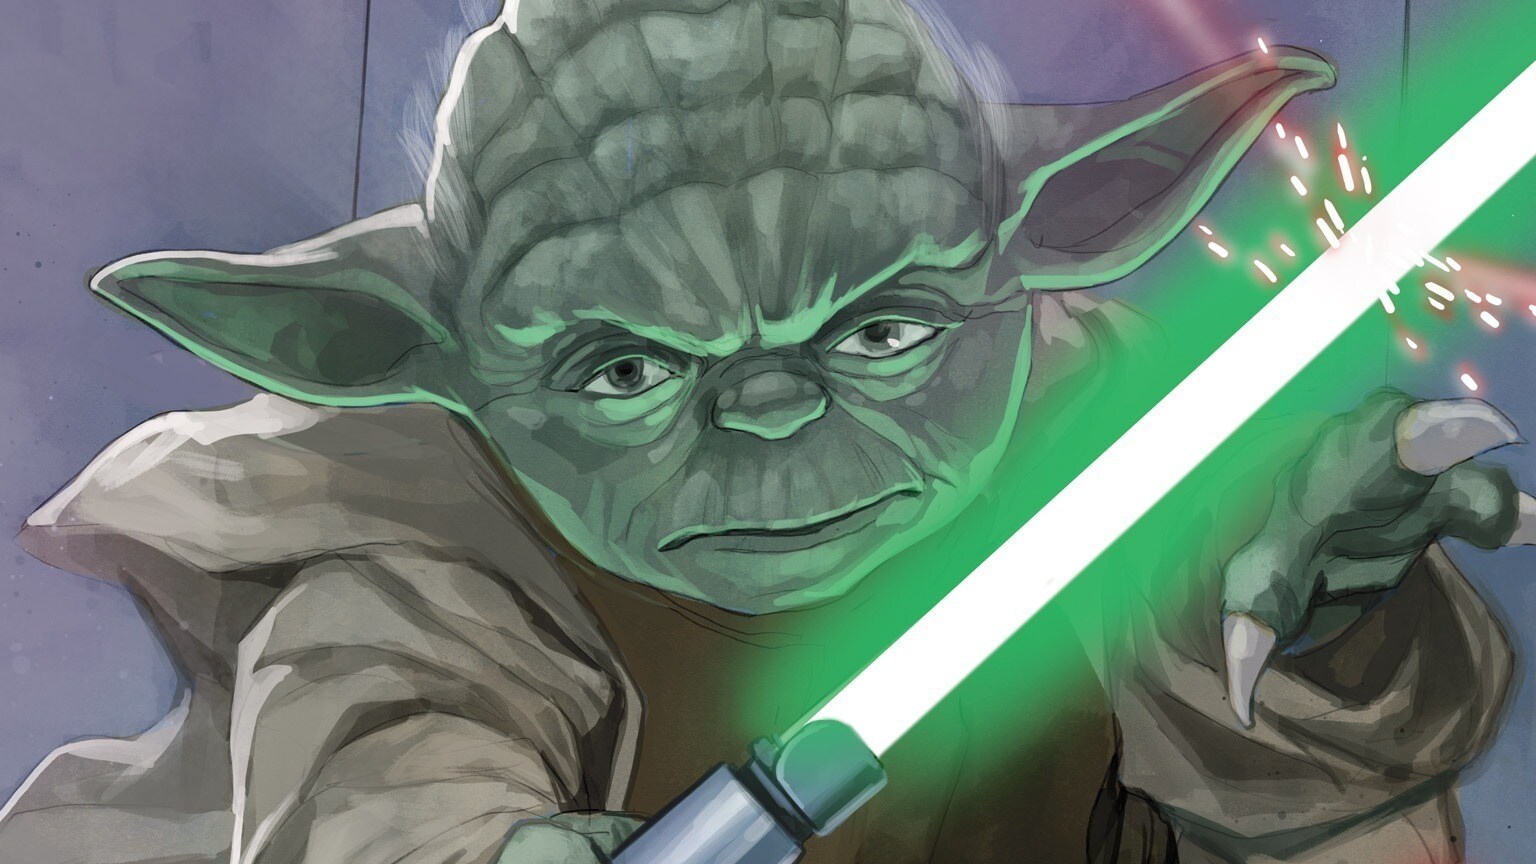 Yoda Begins a New Mission in Marvel’s Star Wars: Yoda #1 - Exclusive Preview